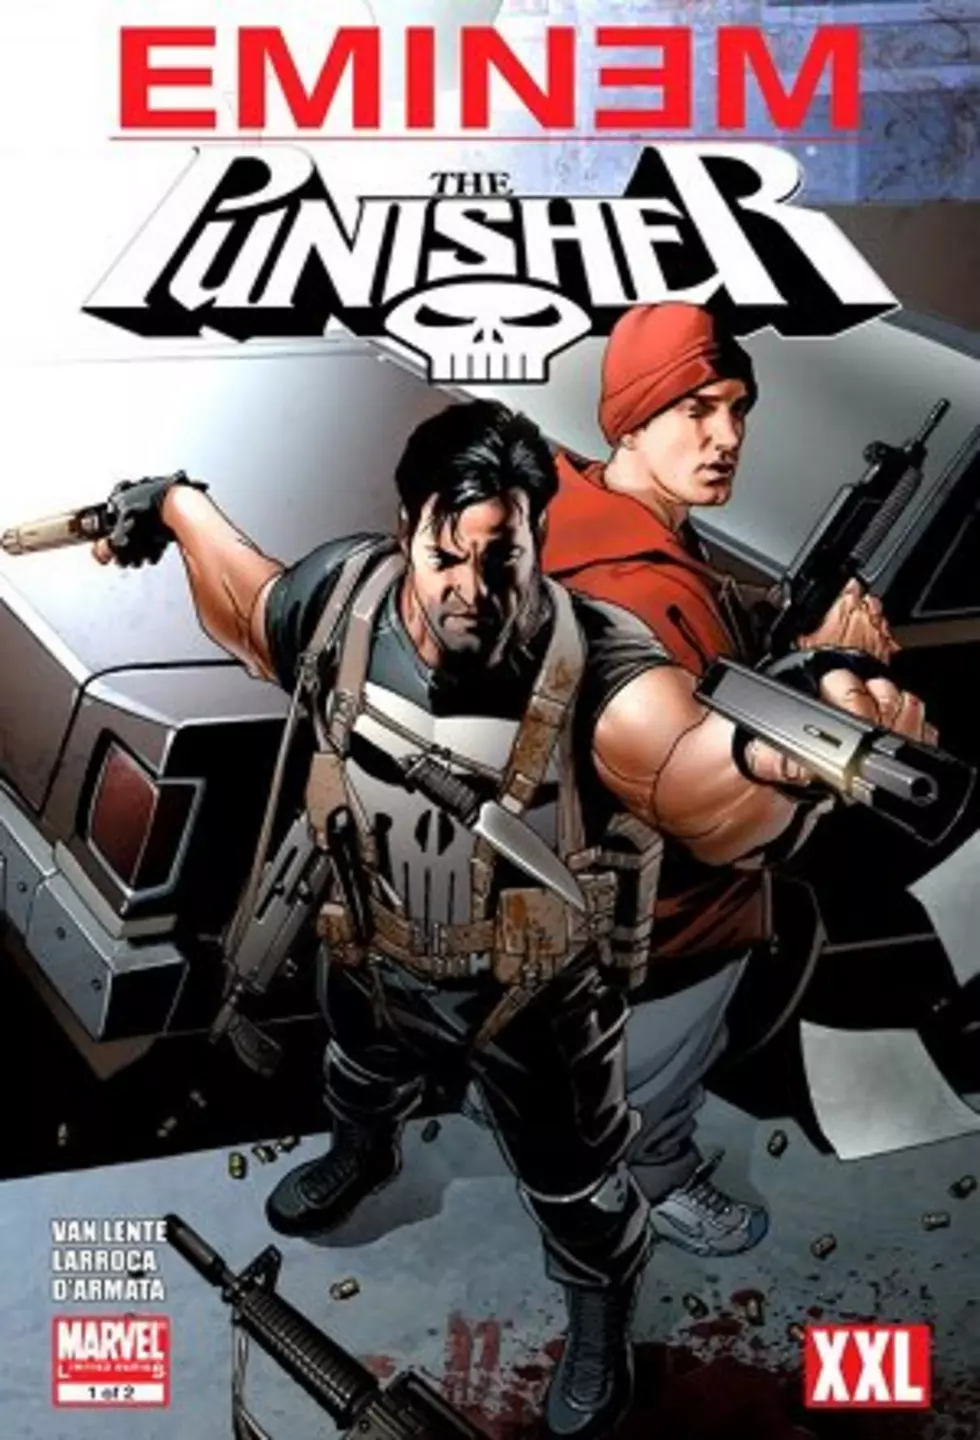 Did You Know Eminem Once Had A Comic Book?